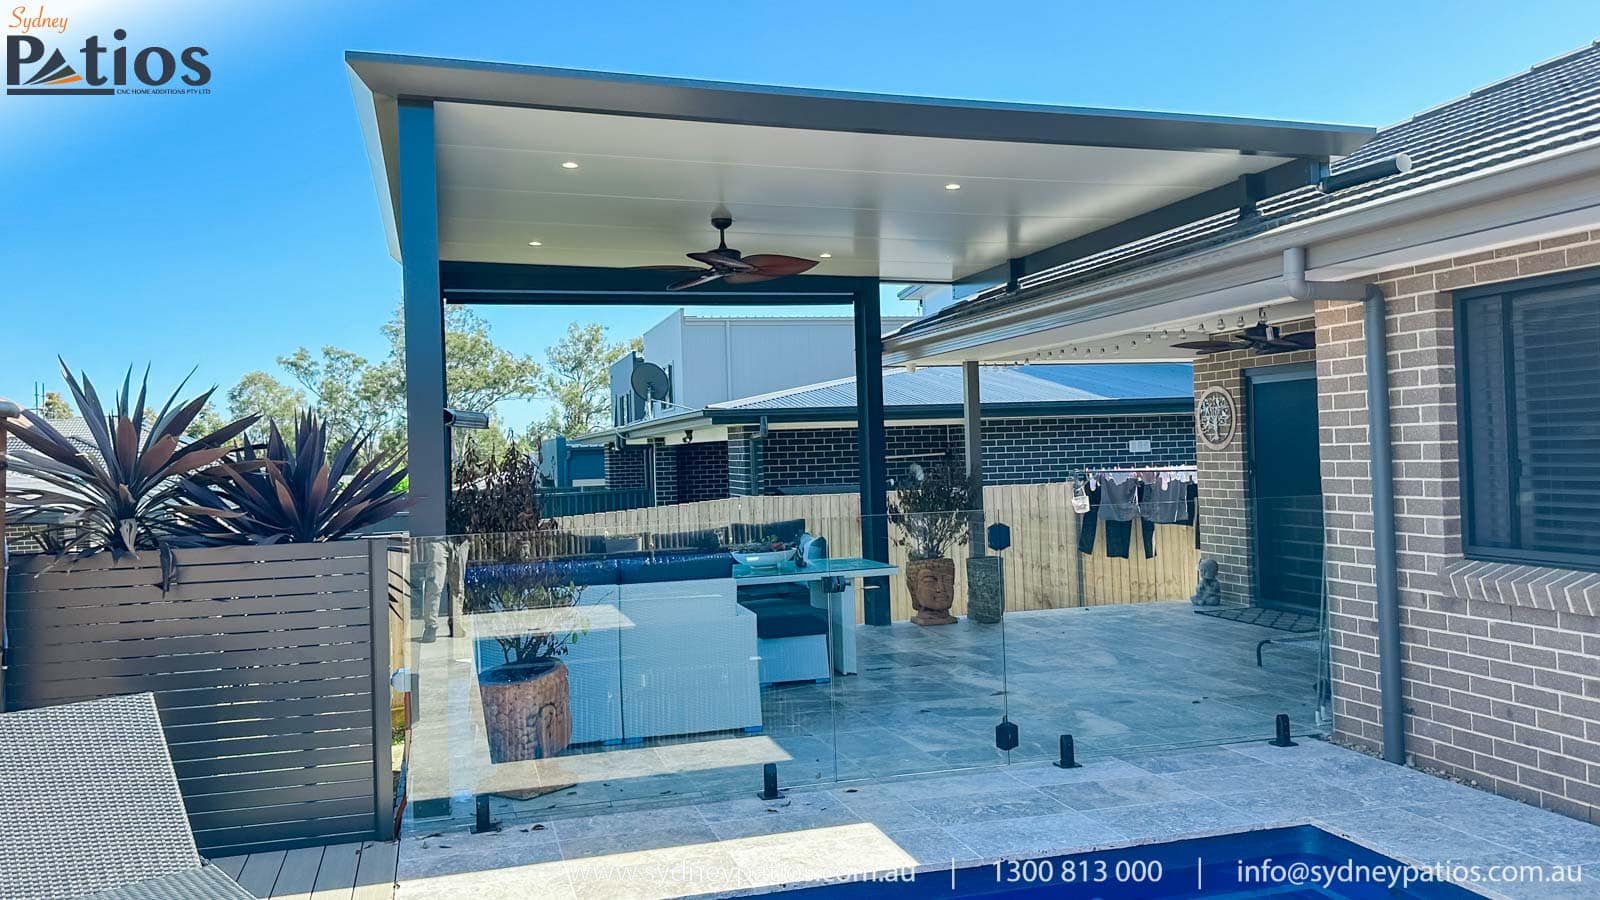 Sydney Patios' Oran Park Insulated Patio next to Swimming Pool